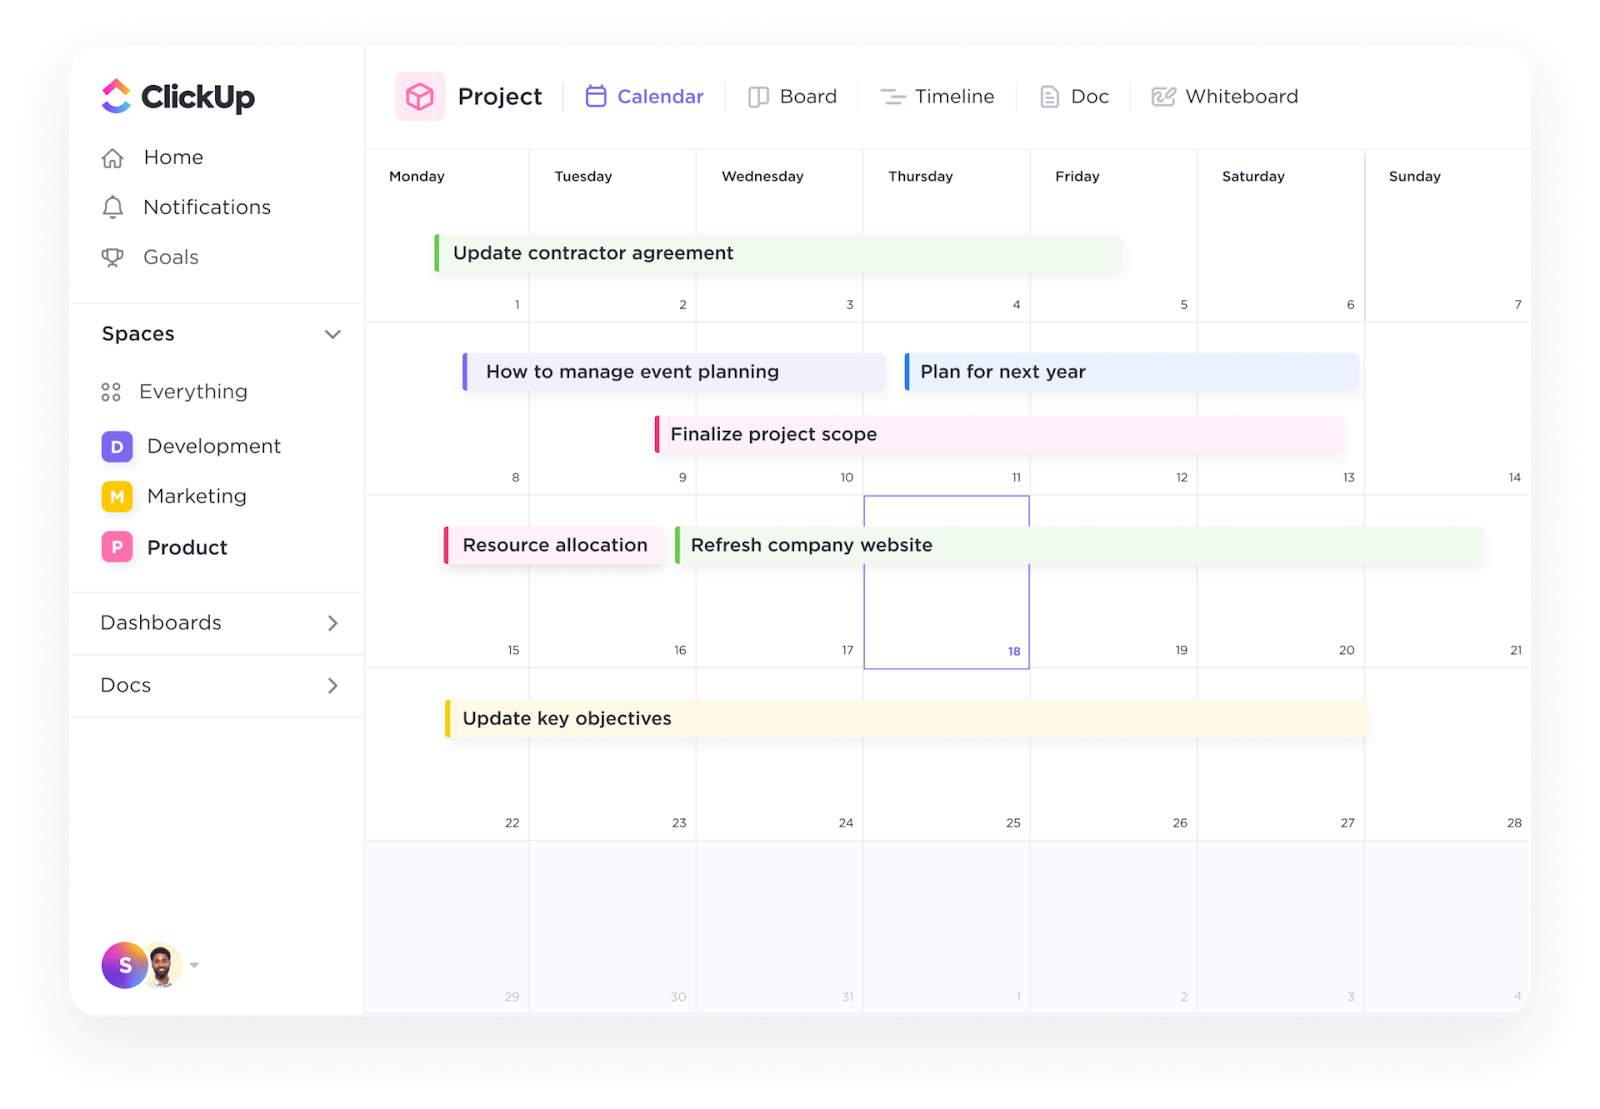 View your scheduled tasks in a daily, weekly, or monthly format with ClickUp’s Calendar View